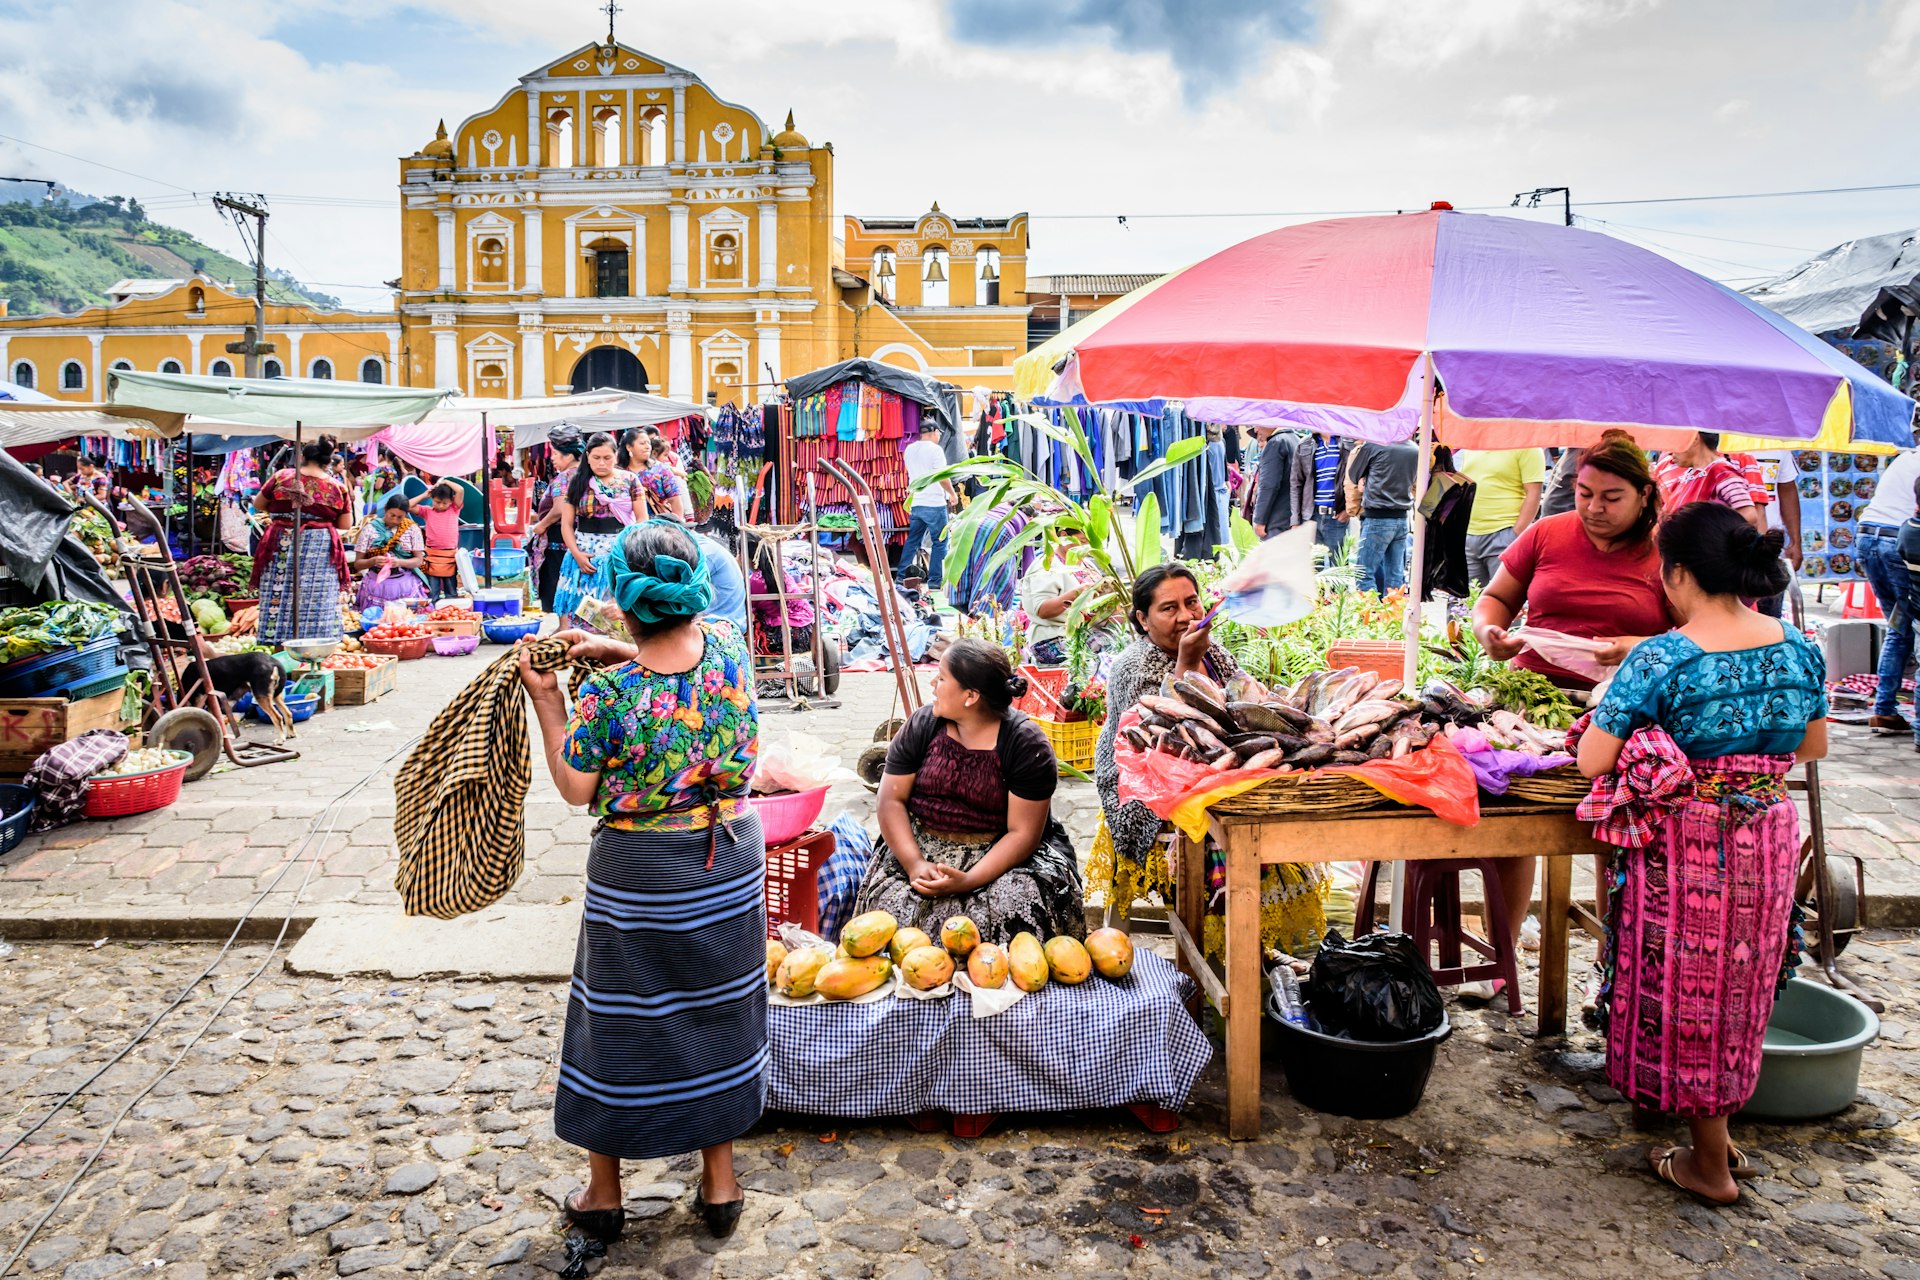 Market sellers on a lively Sunday market in front of the cathedral facade in the main square of Antigua, Guatemala